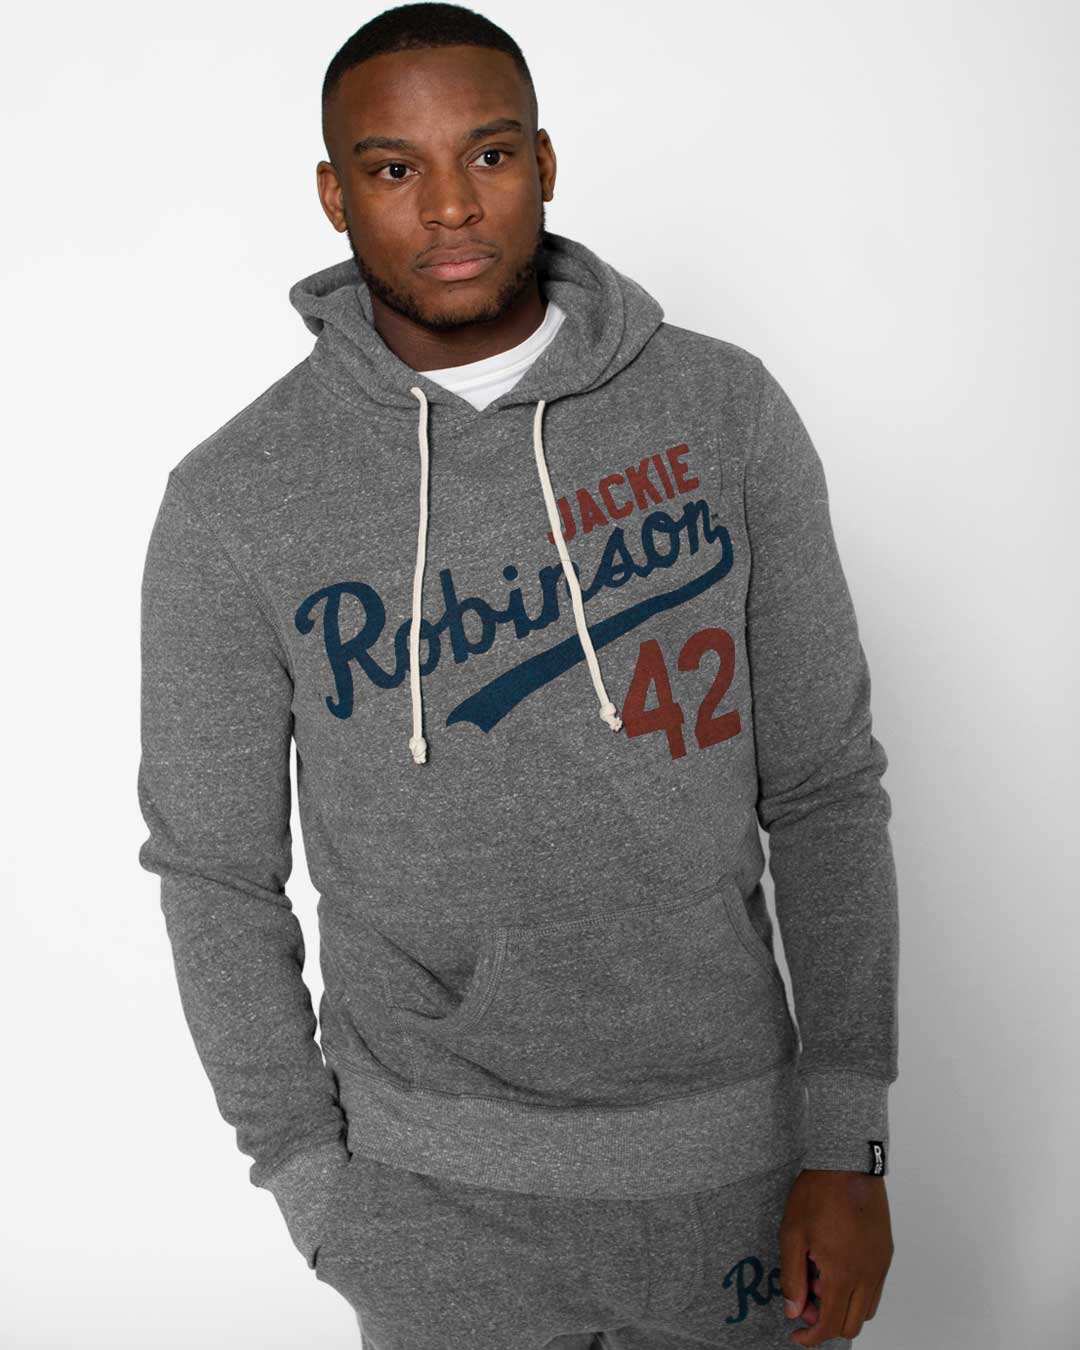 Jackie Robinson #42 Classic Grey PO Hoody - Roots of Fight